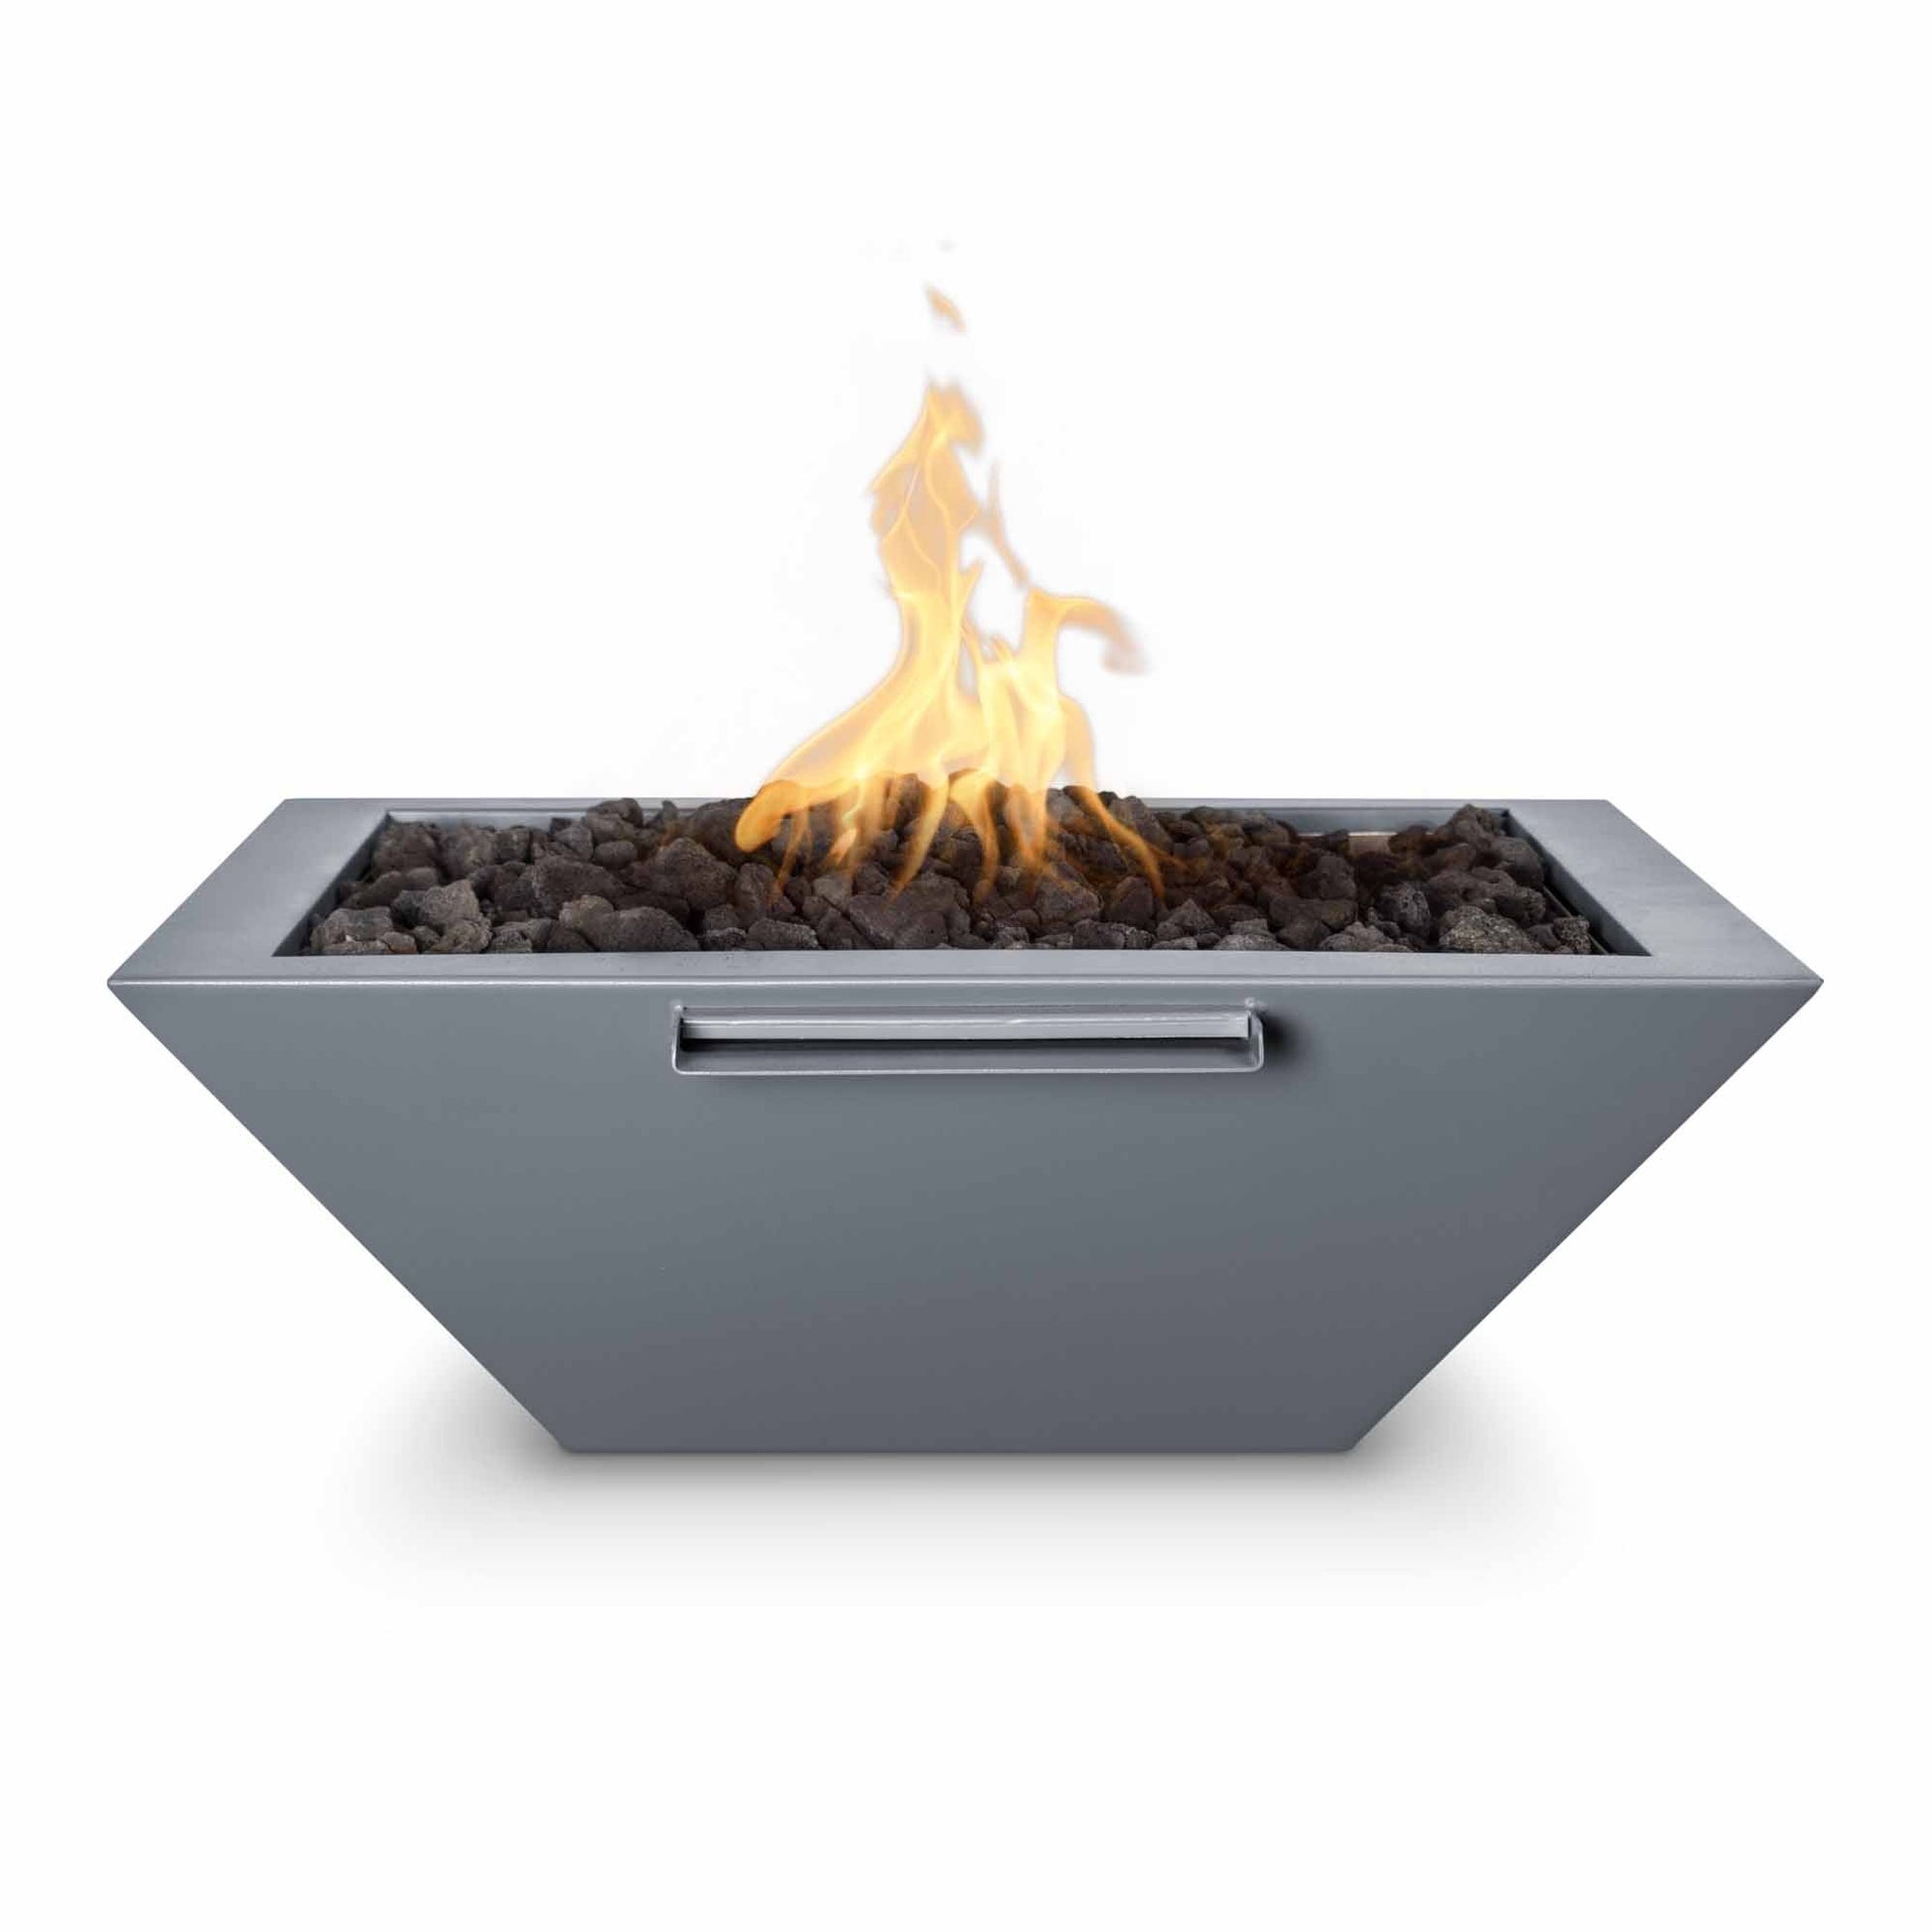 The Outdoor Plus Square Maya 24" Silver Vein Powder Coated Metal Liquid Propane Fire Bowl with Match Lit with Flame Sense Ignition